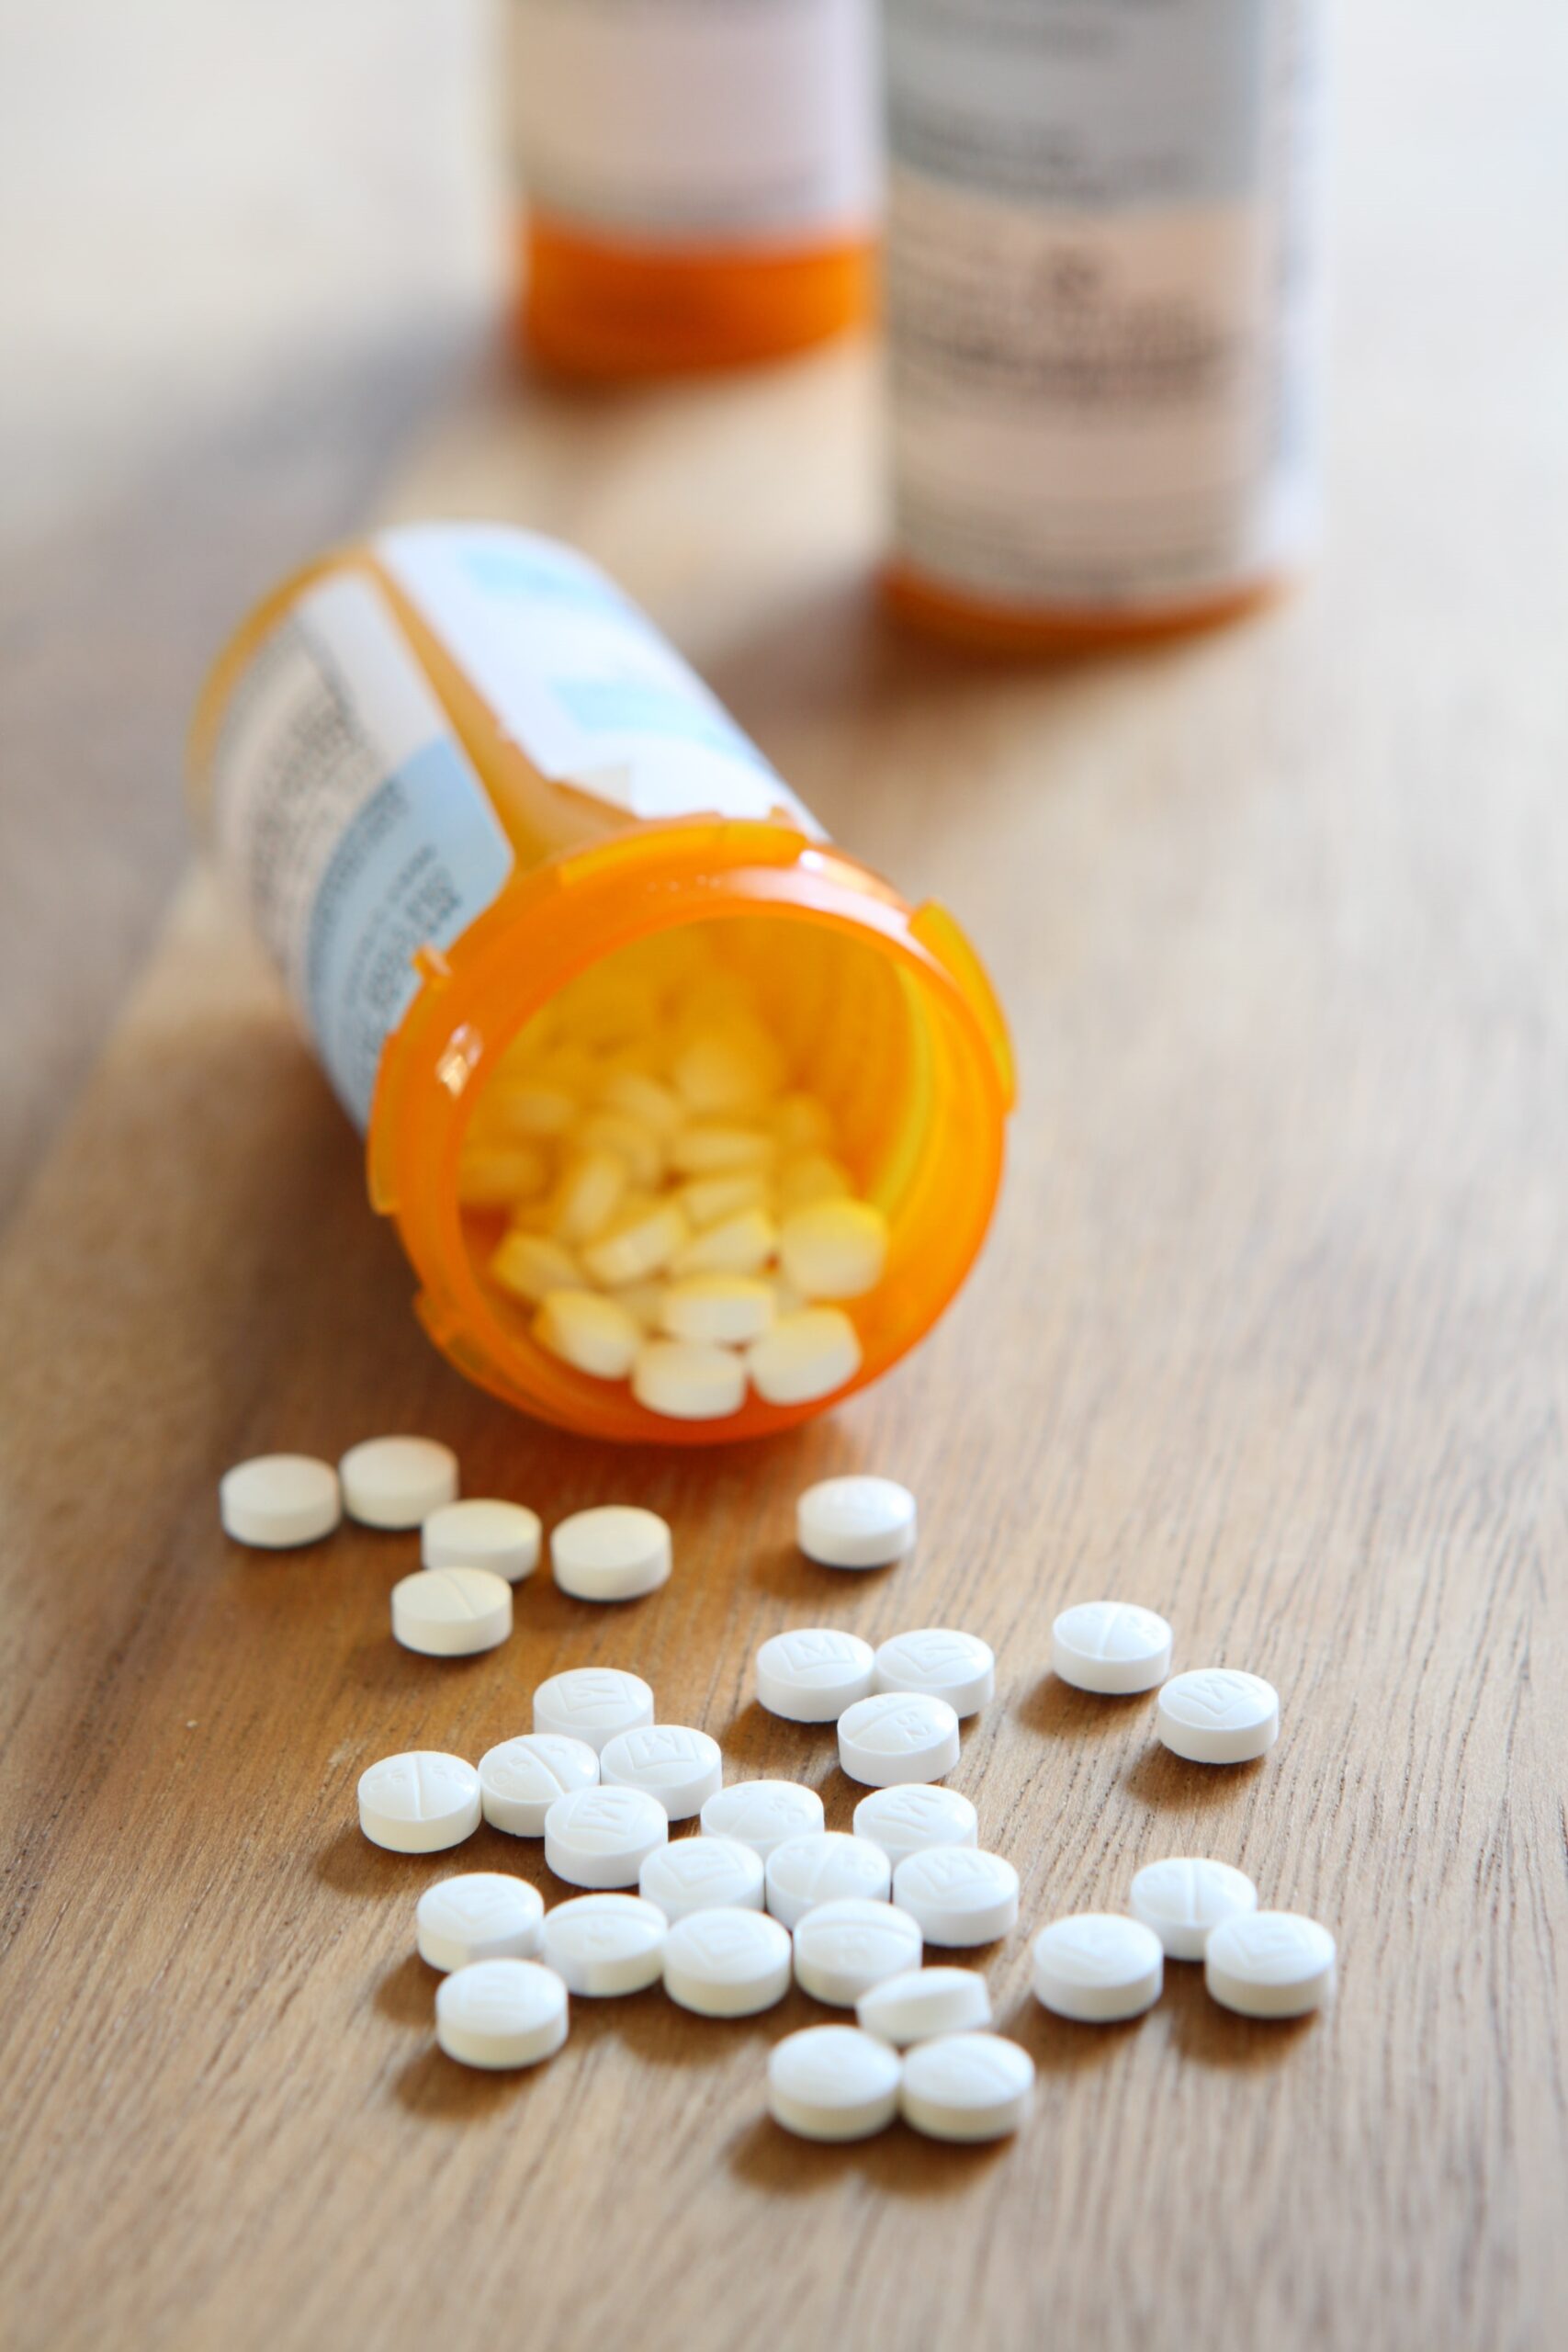 How does benzo addiction treatment work